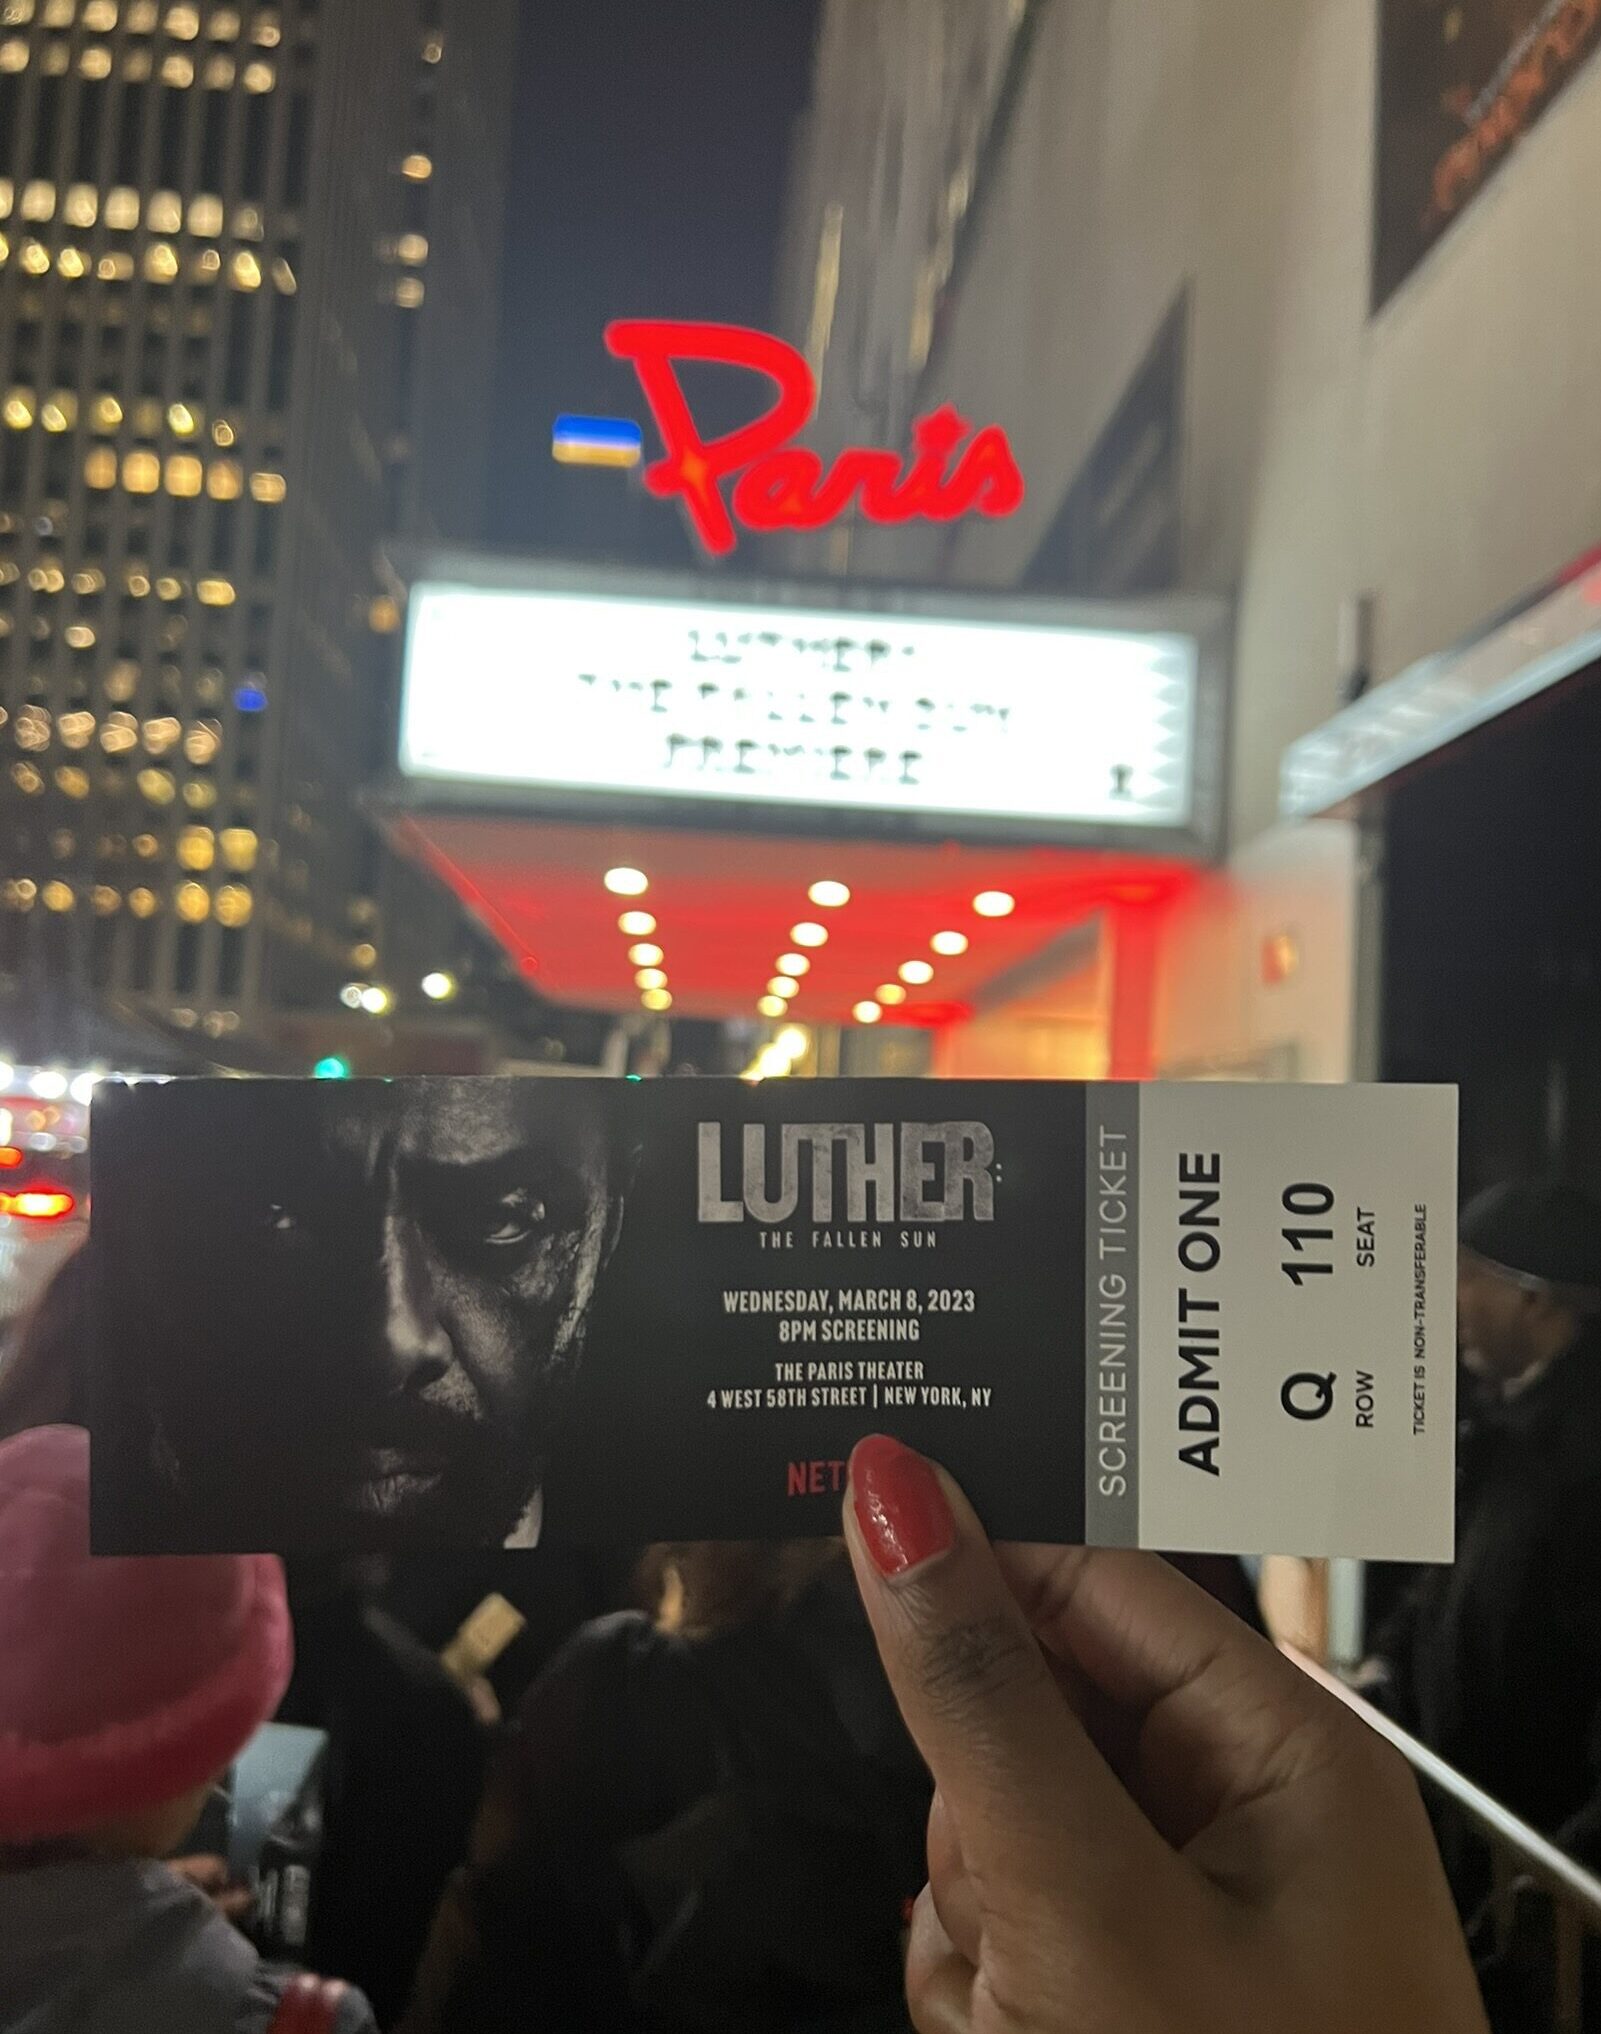 The author holds their free ticket to the red-carpet screening of “Luther” in front of the Paris Theater’s marquee.